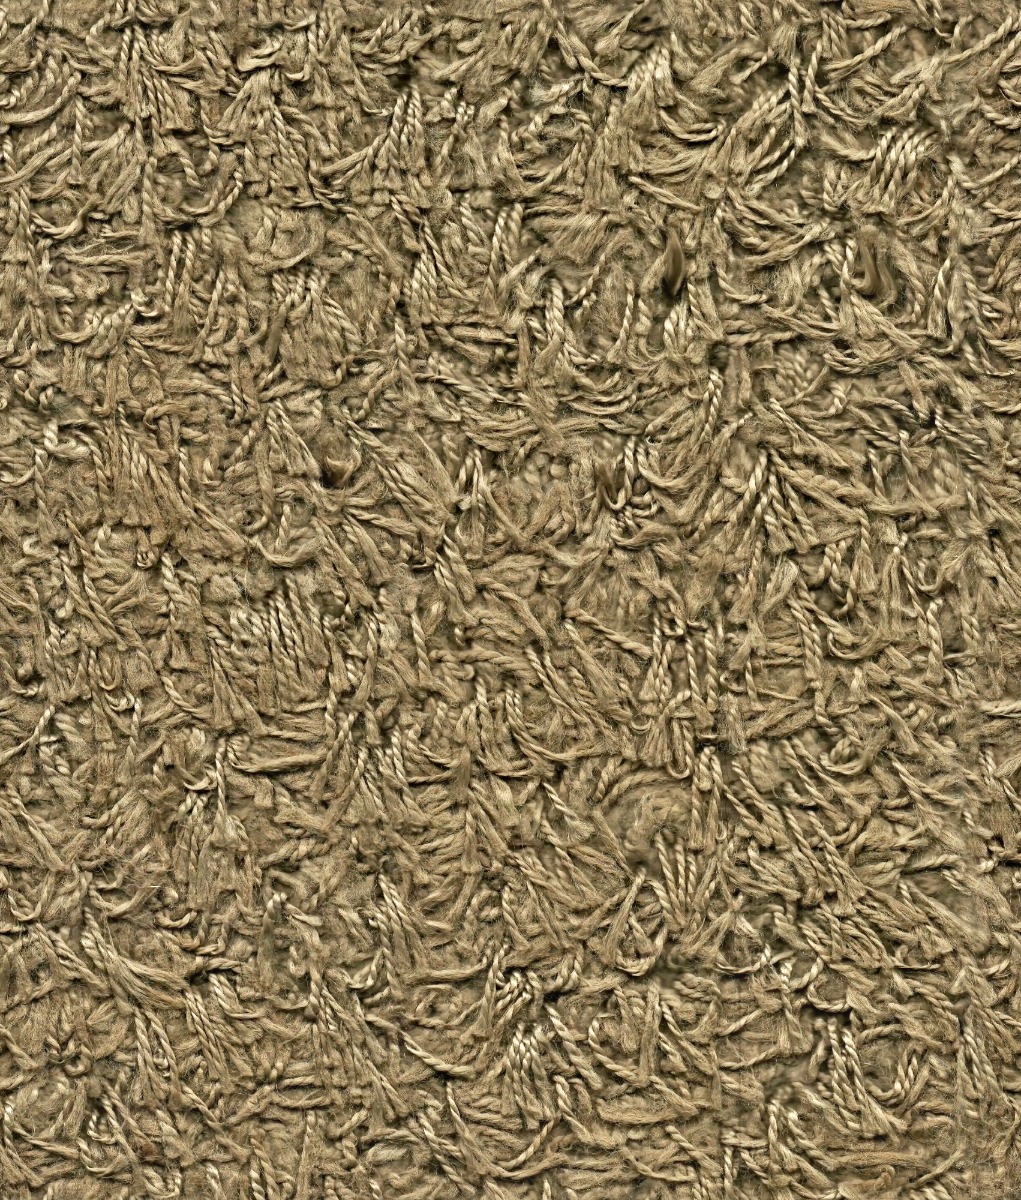 A seamless carpet texture with tassel carpet units arranged in a None pattern